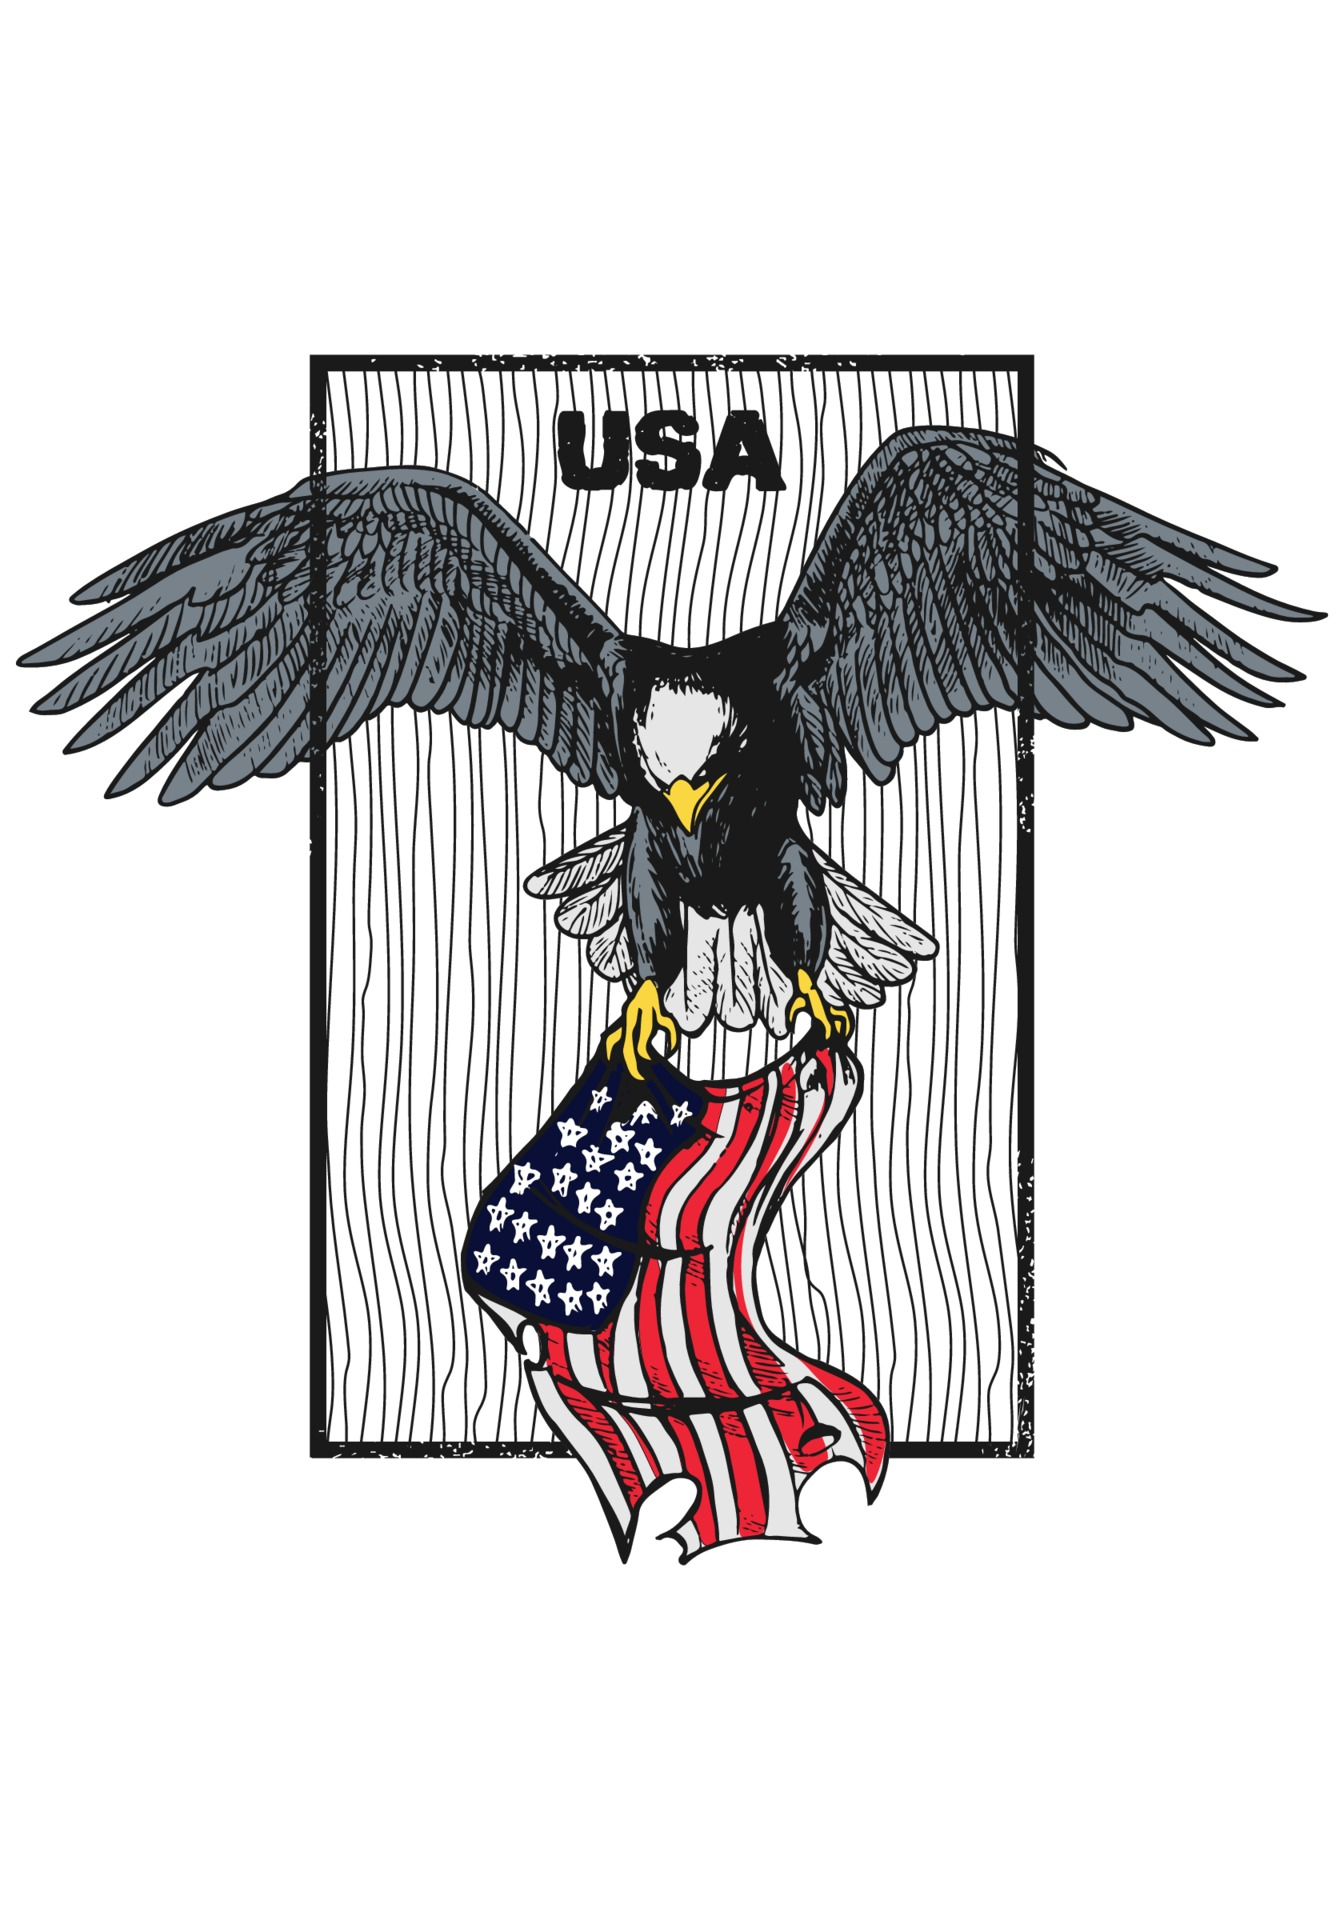 1344x1920 Hand drawn of eagle holding colorful american flag isolated on white background. Sketch of eagle holding american flag for symbol, logo or wallpaper isolated on black grunge. 1924856 Vector Art